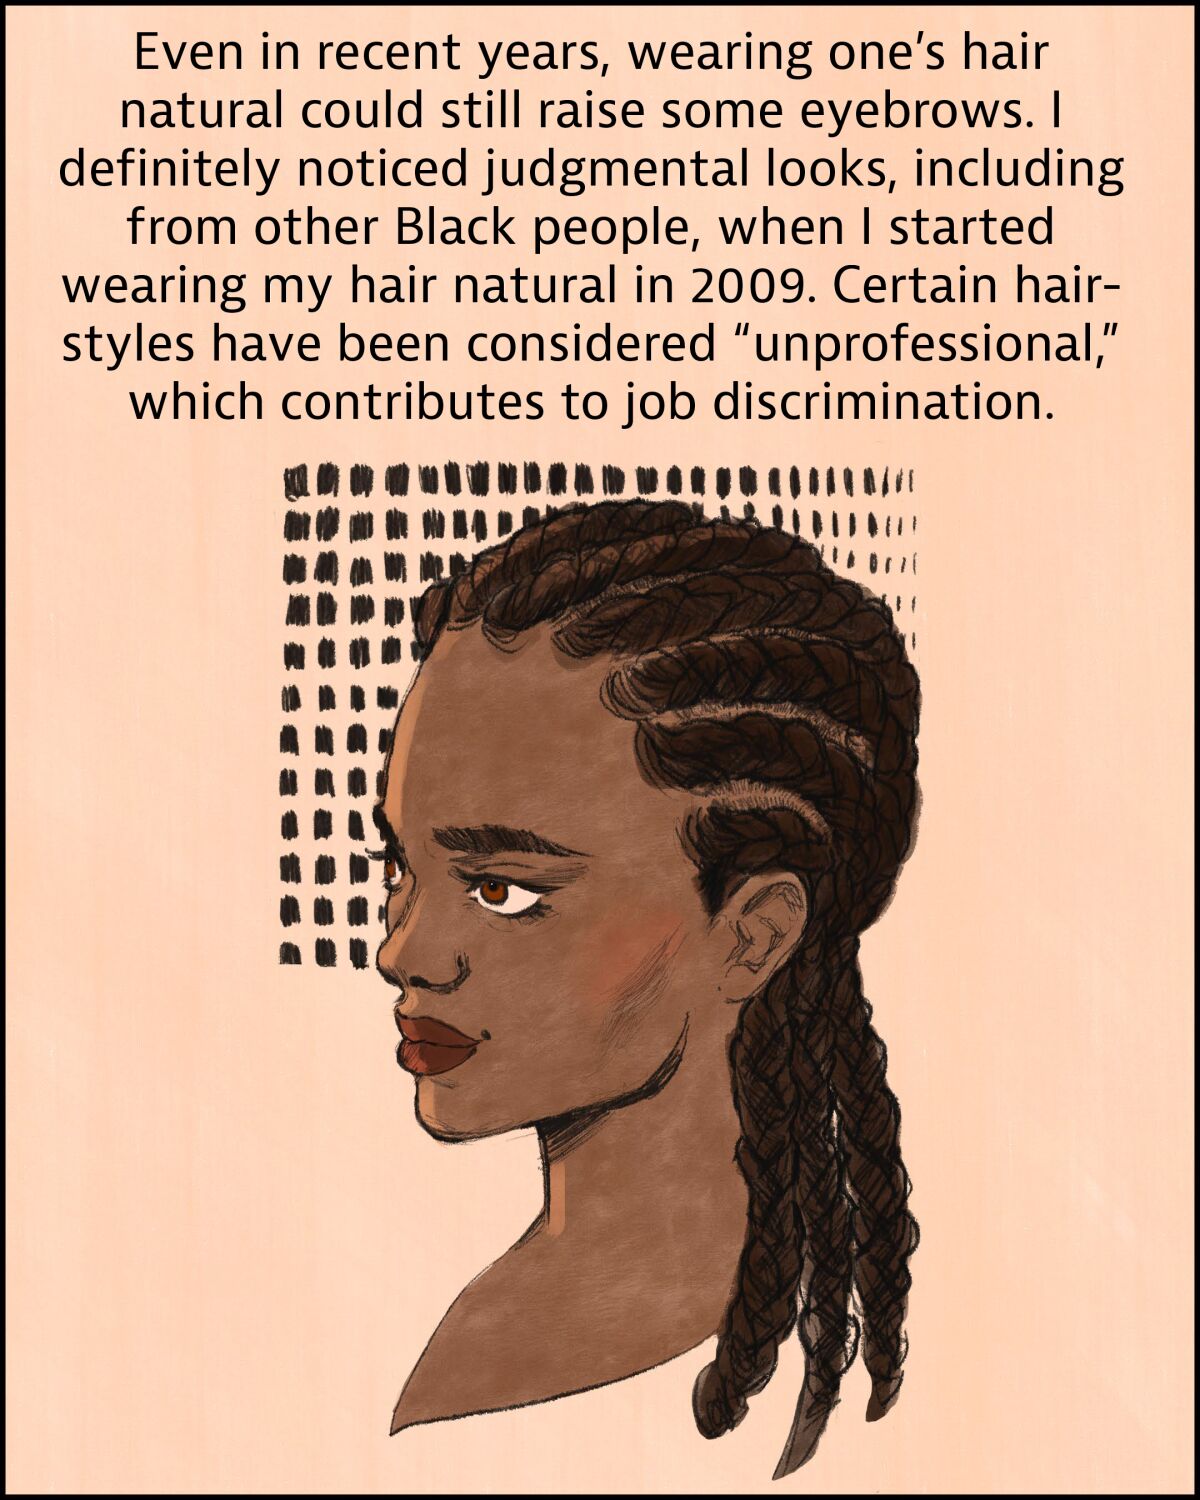 Certain hairstyles have been considered "unprofessional" which contributes to job discrimination